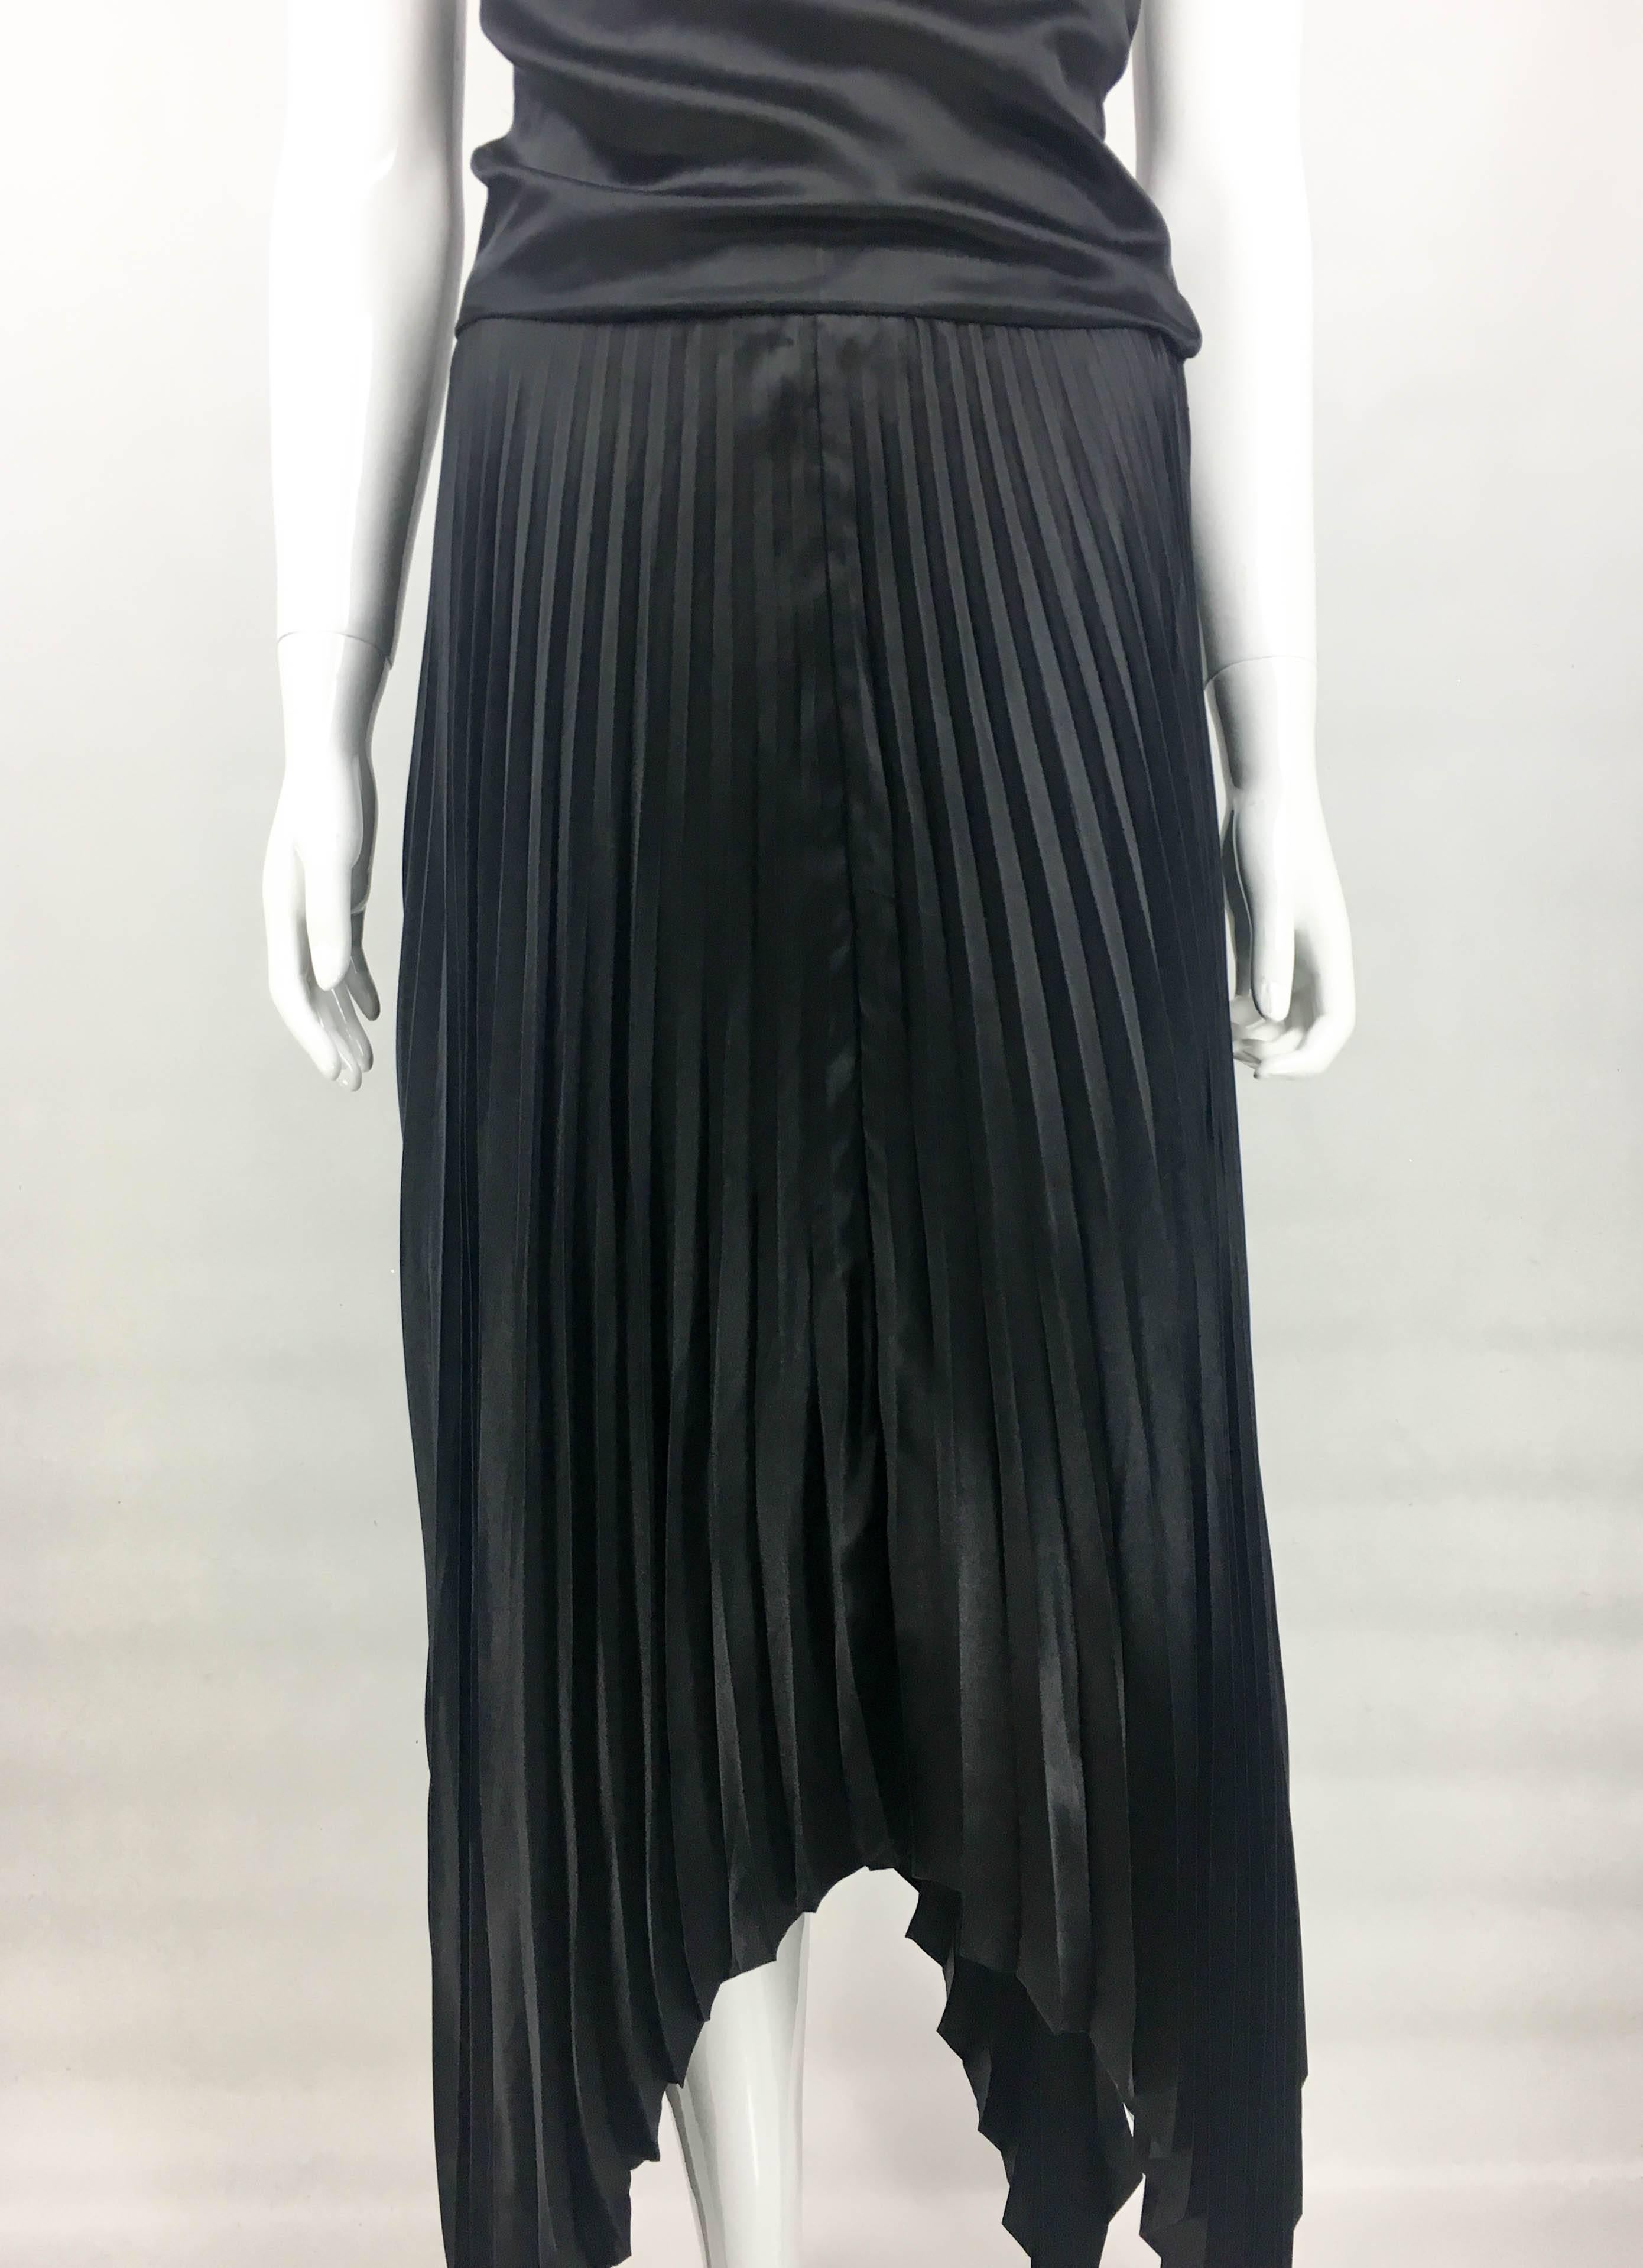 Dior by Marc Bohan Haute Couture Black Silk Pleated Dress, 1983  For Sale 4